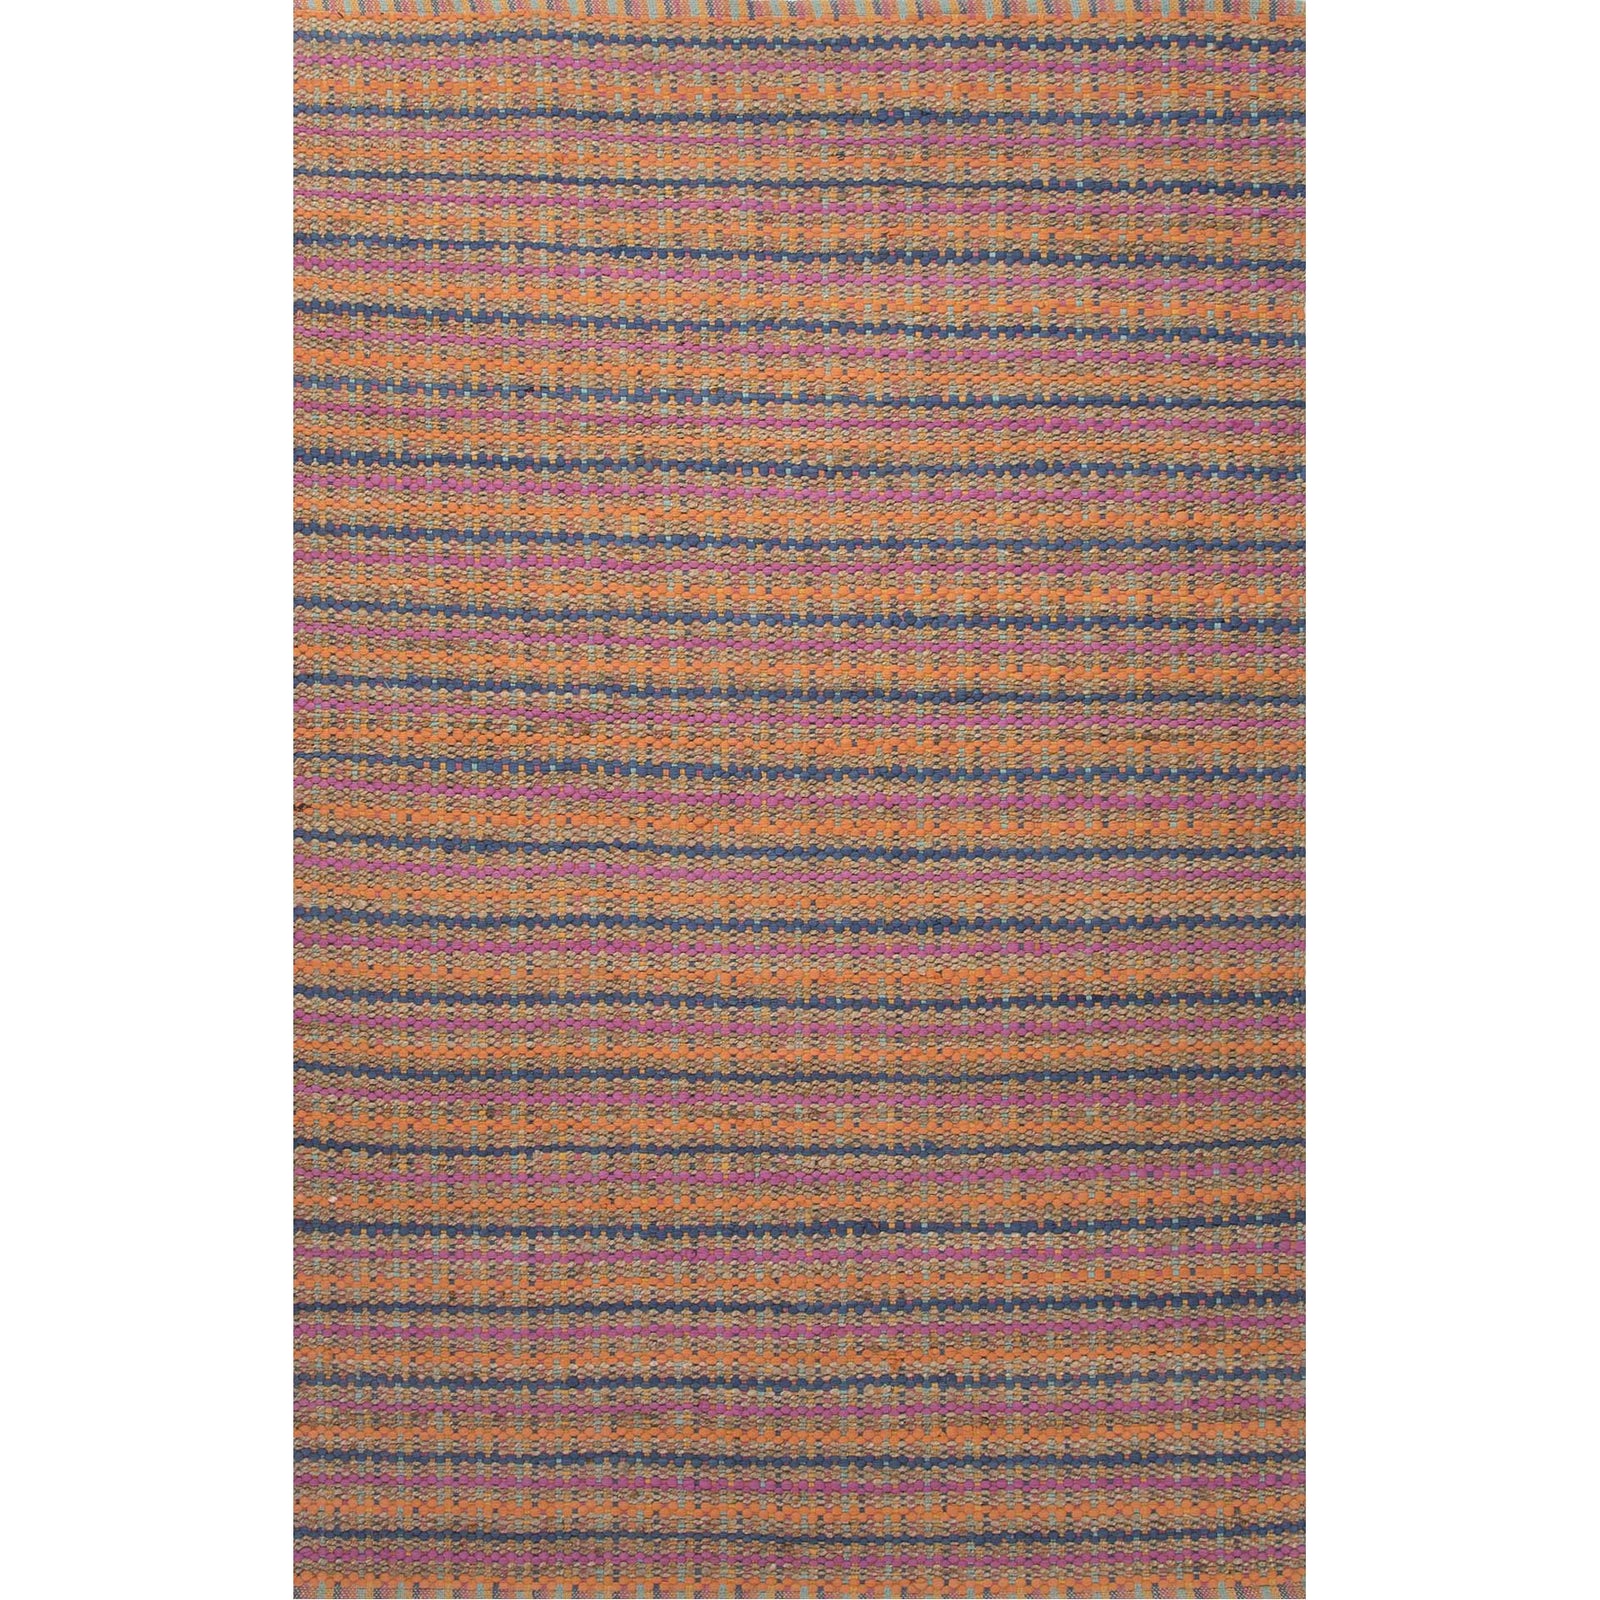 Andes Cornwall Spring Area Rug